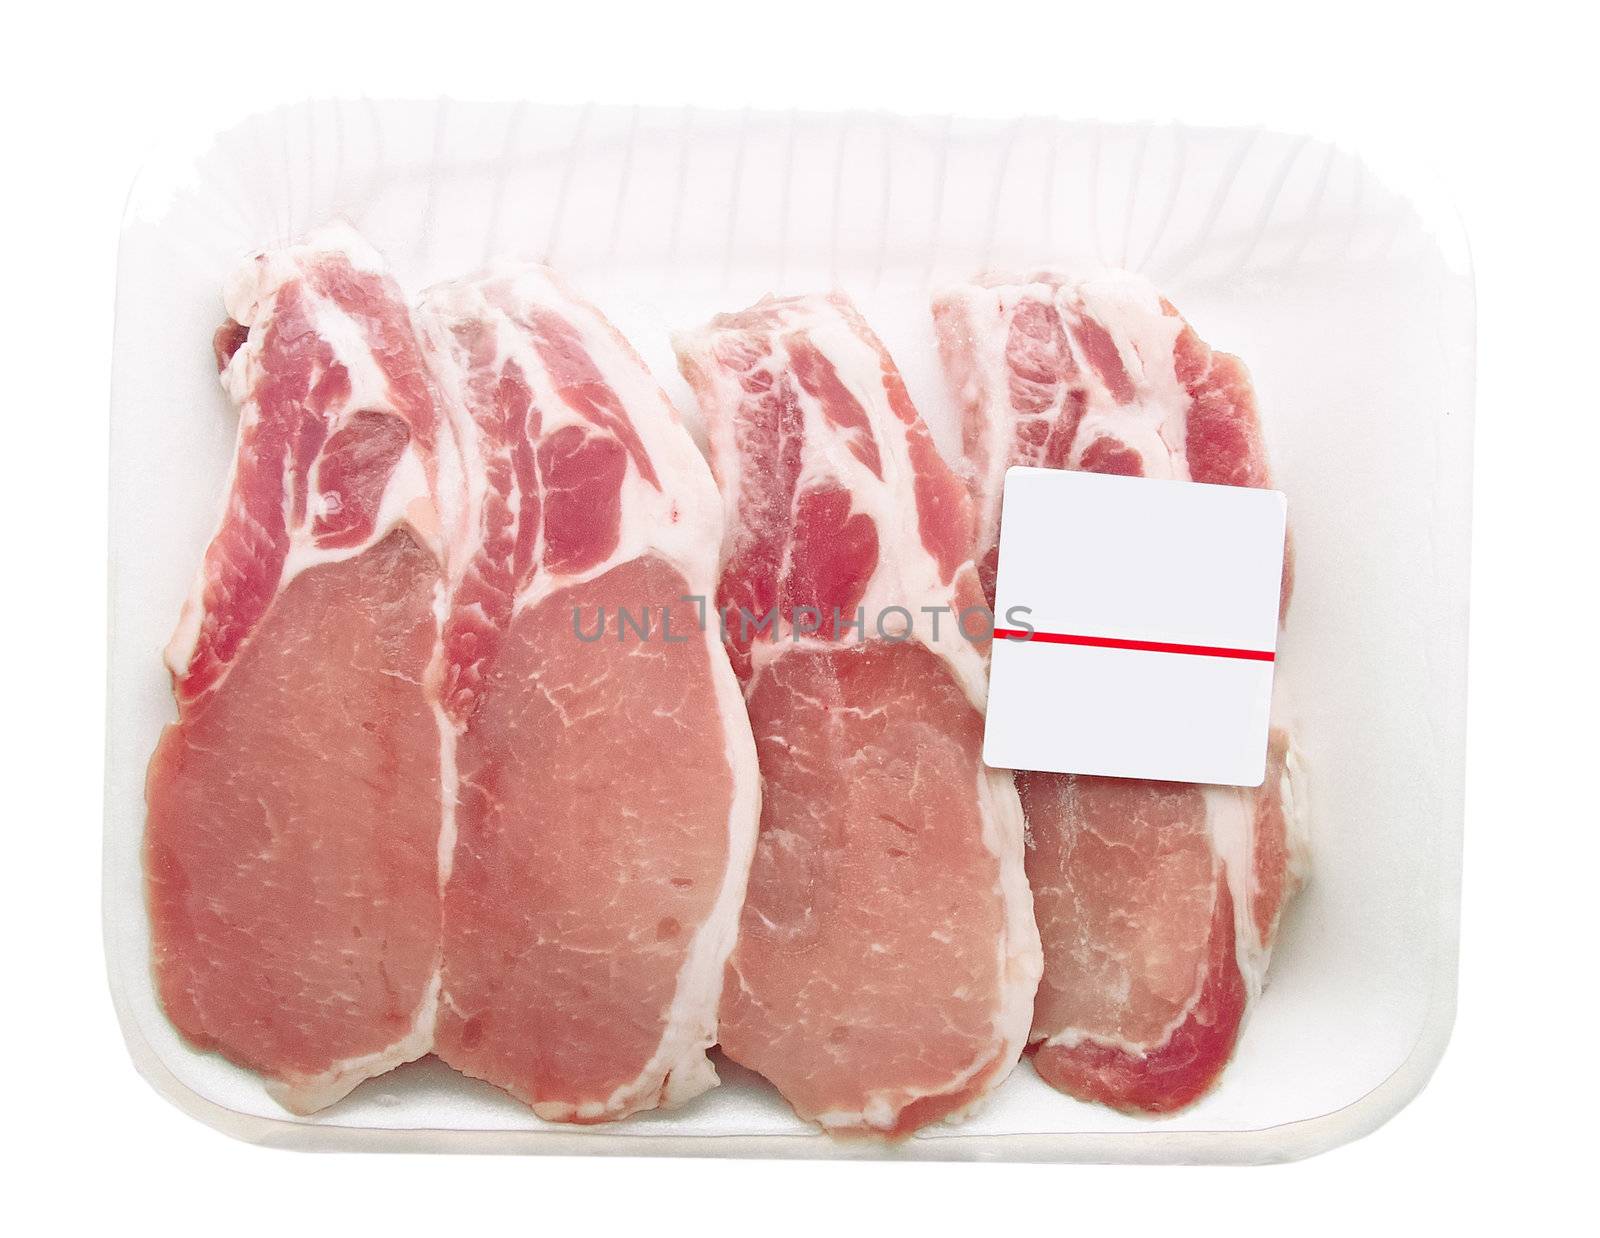 Pork chops packaged in a container with a price tag by NickNick